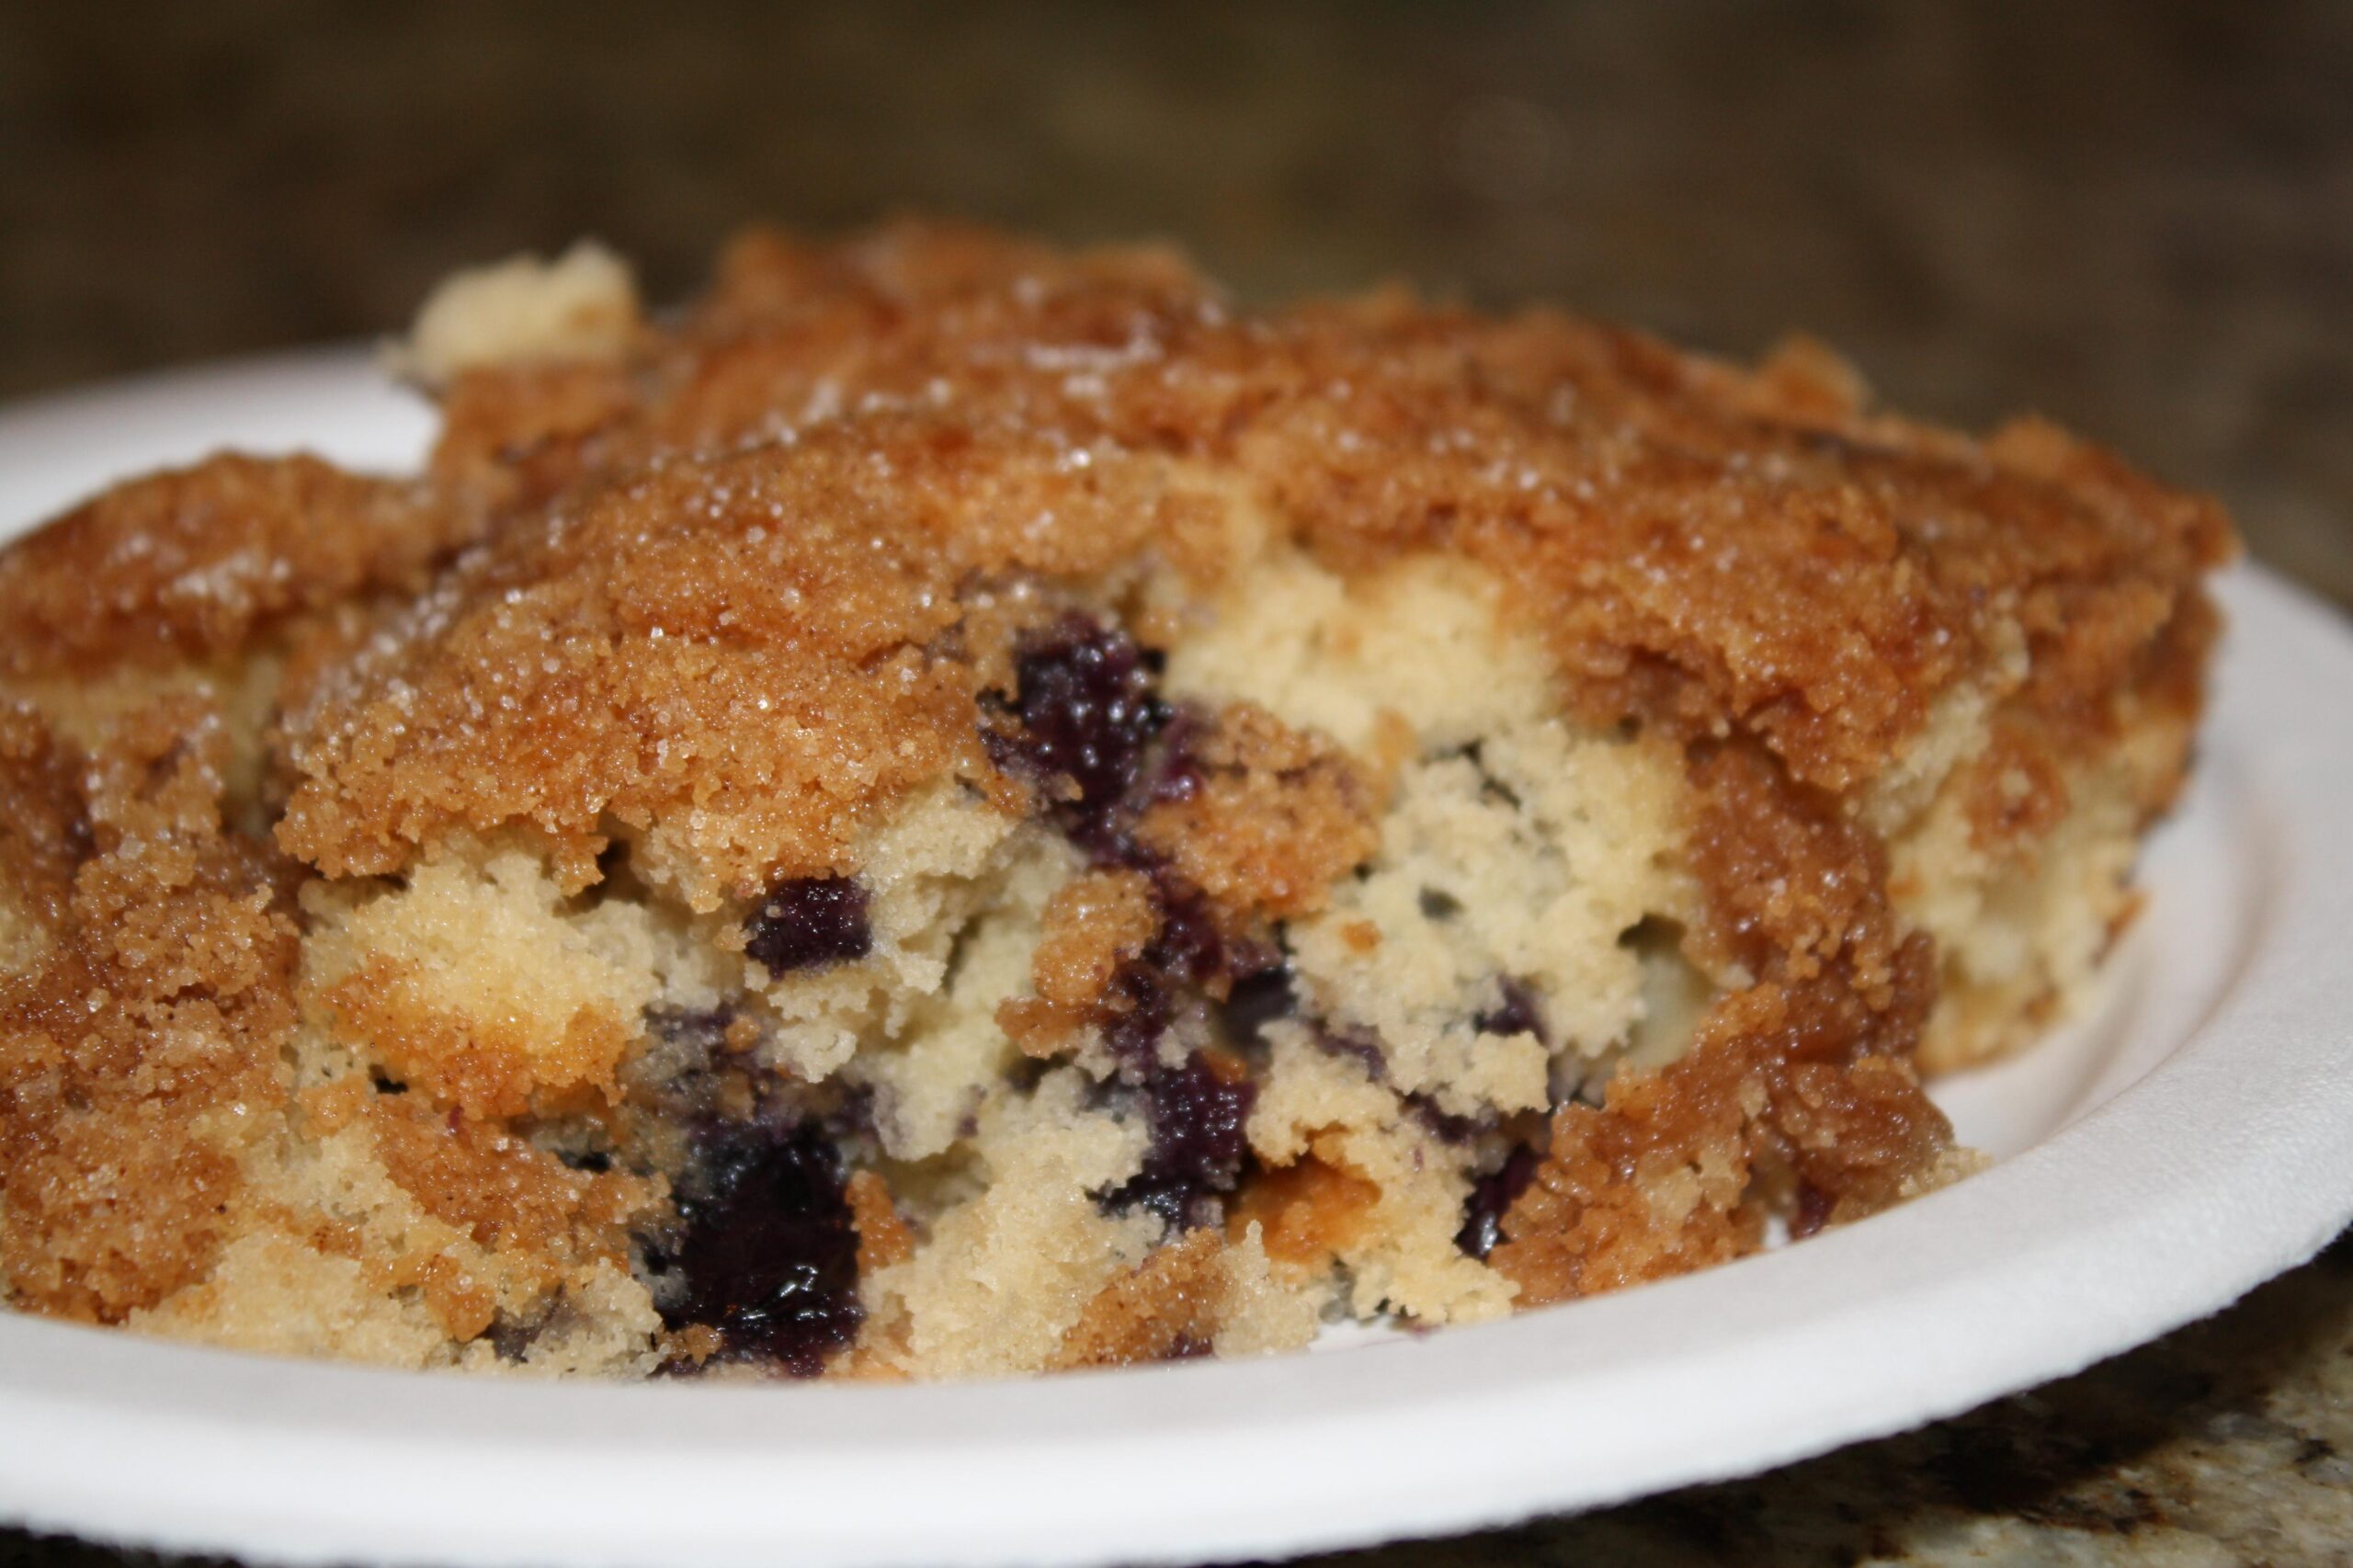  Blueberries + coffee cake = pure bliss.